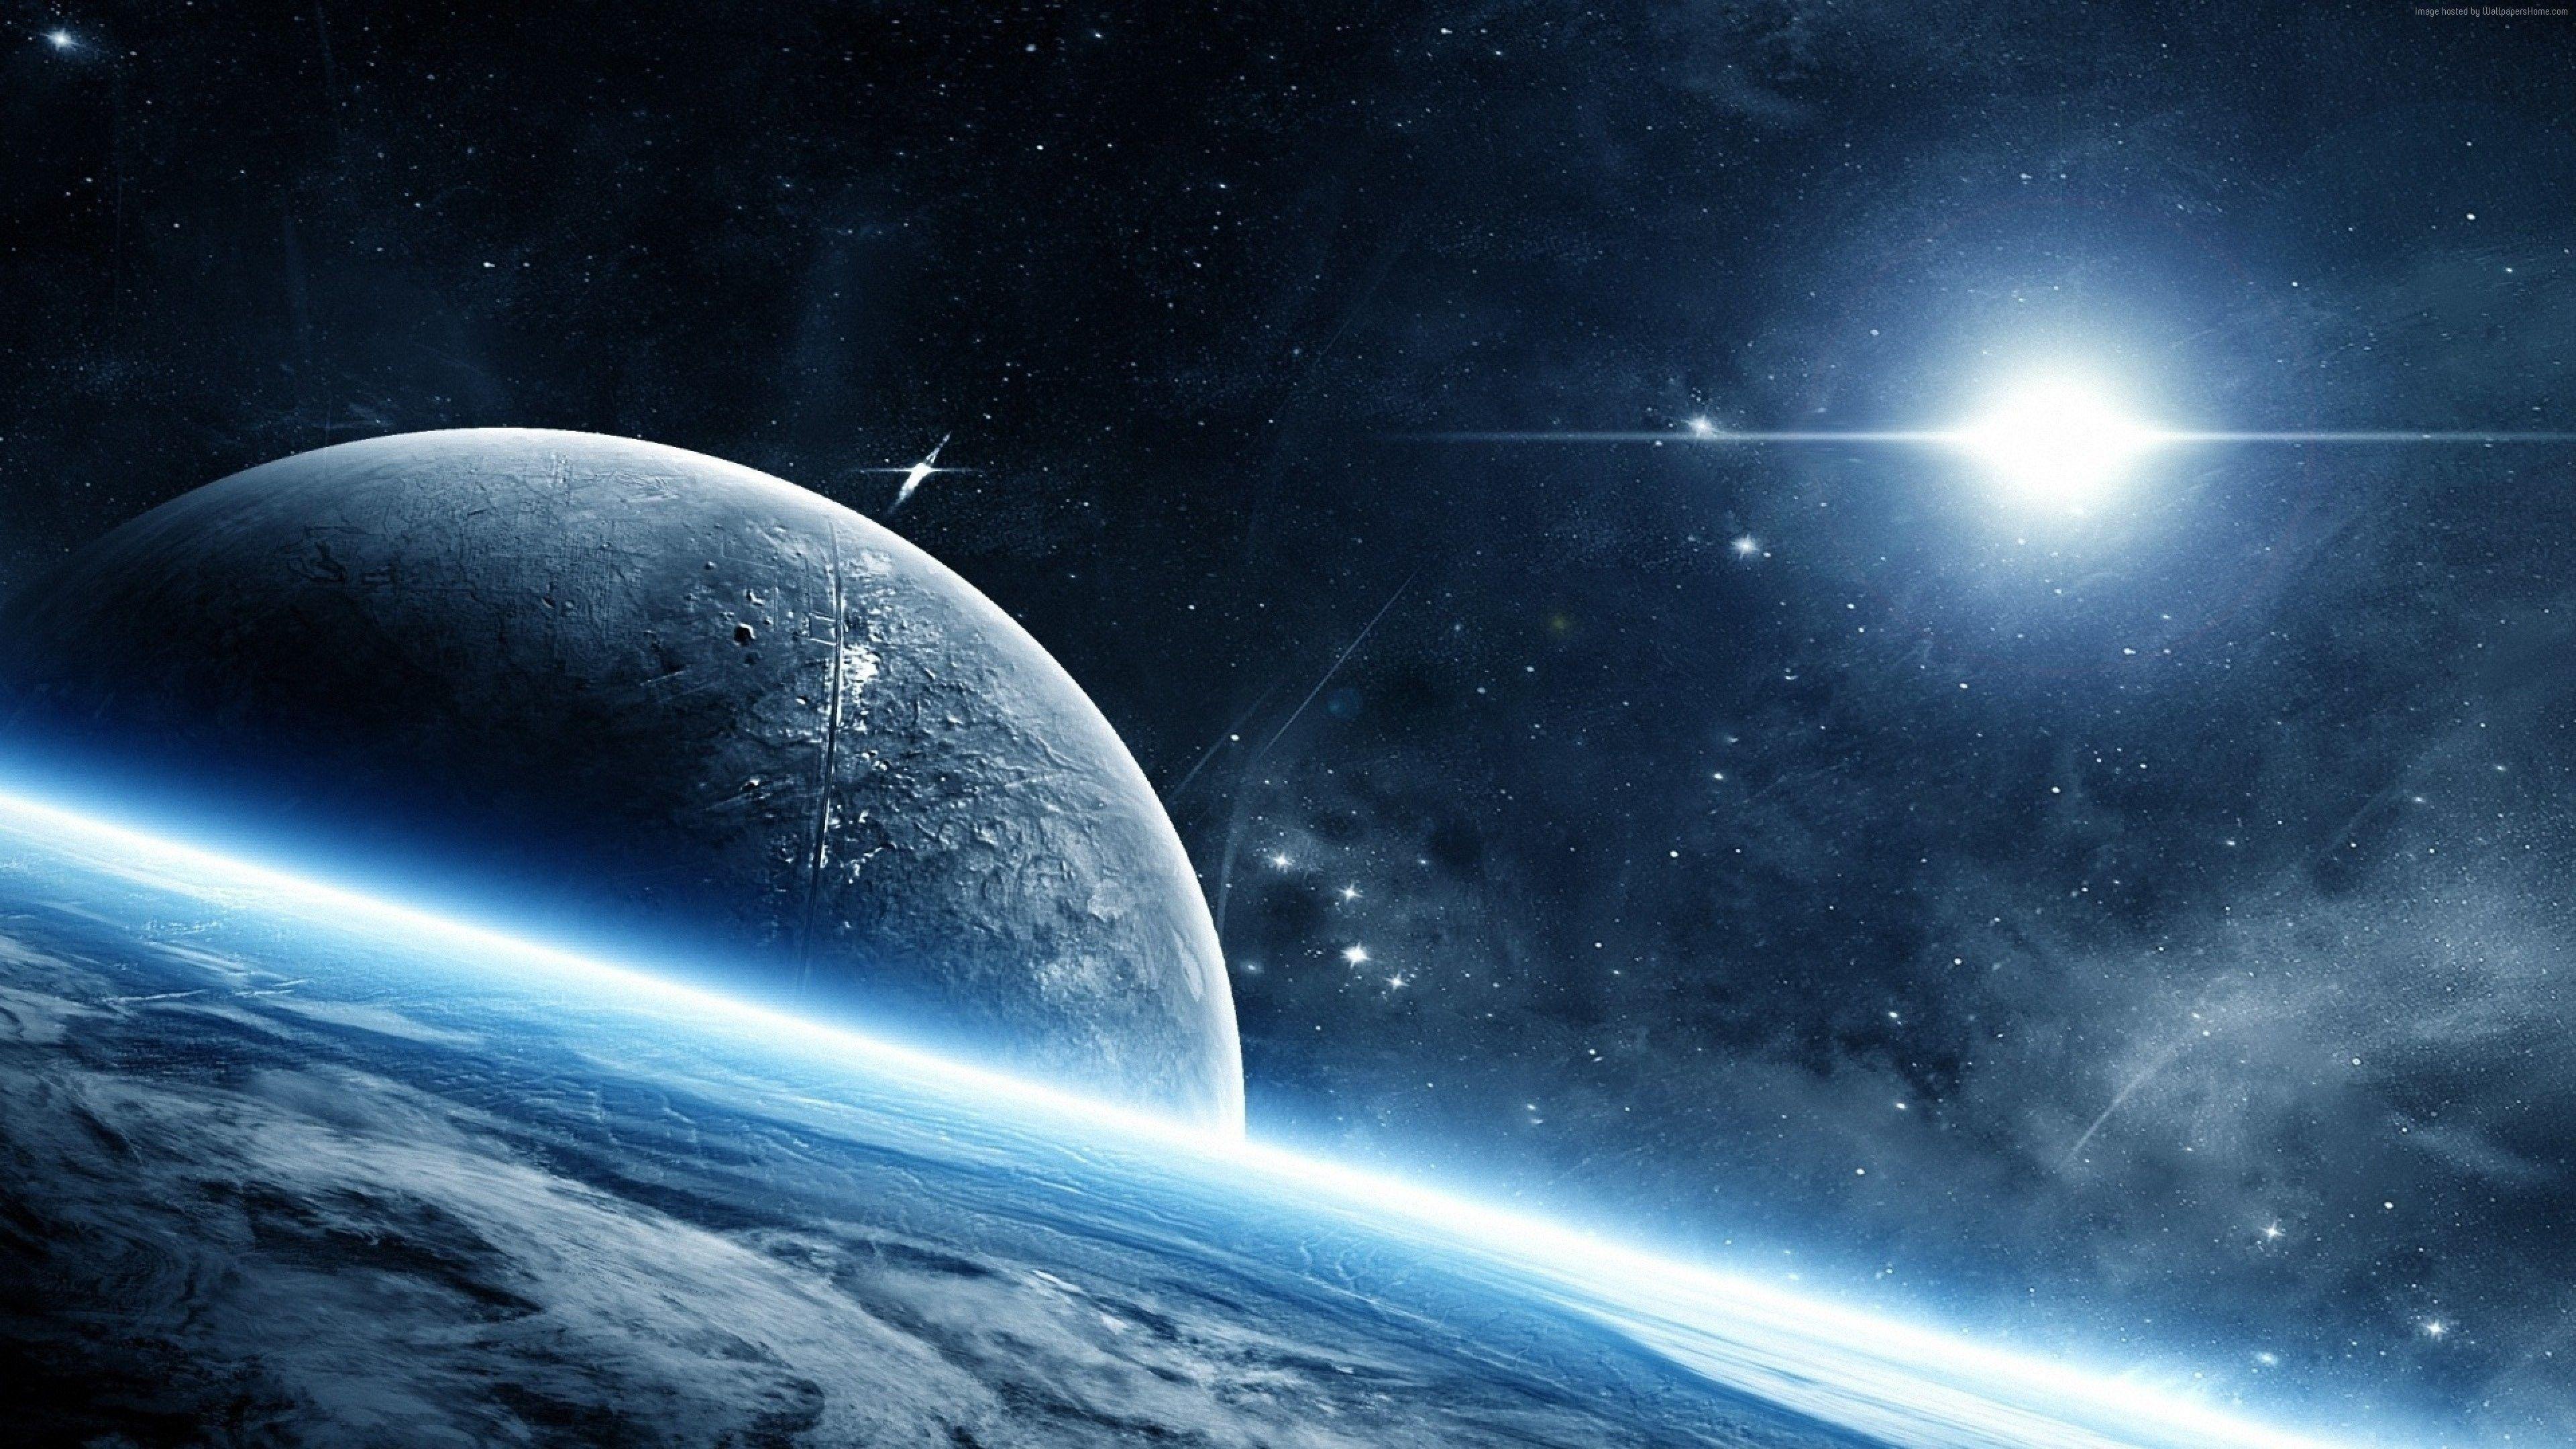 Space And Planets Wallpapers Top Free Space And Planets Backgrounds Wallpaperaccess 2978